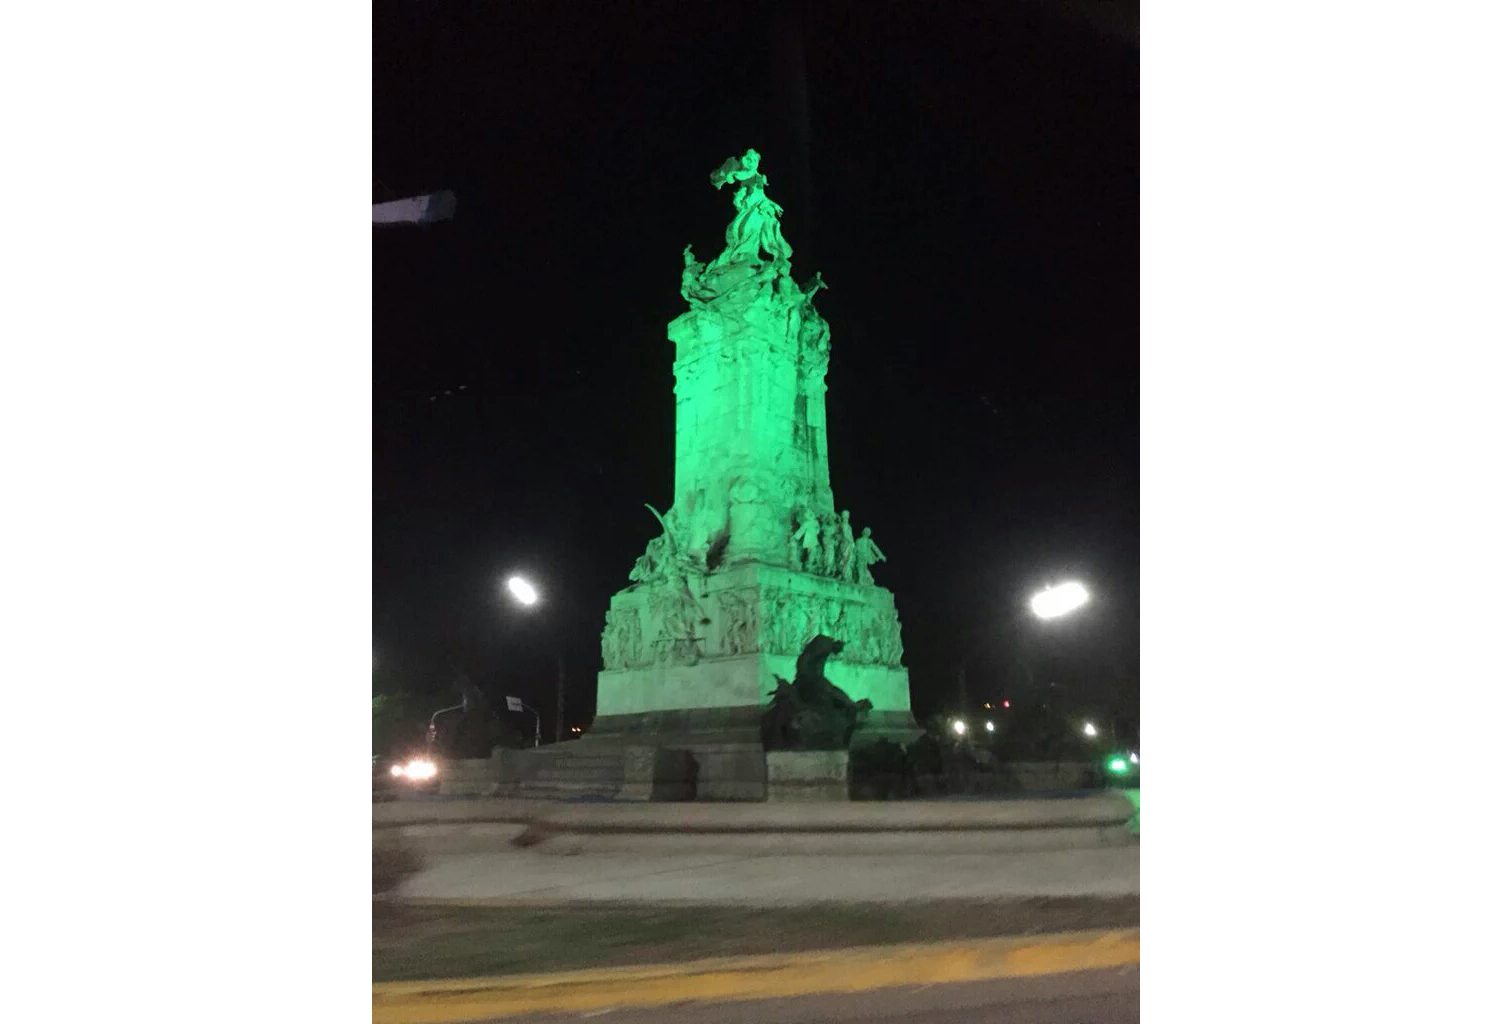 The Spanish Monument in Buenos Aires, raised in 1910 for the  centennial of Argentina’s Revolution of May, illuminated green for Ireland’s own centenary.